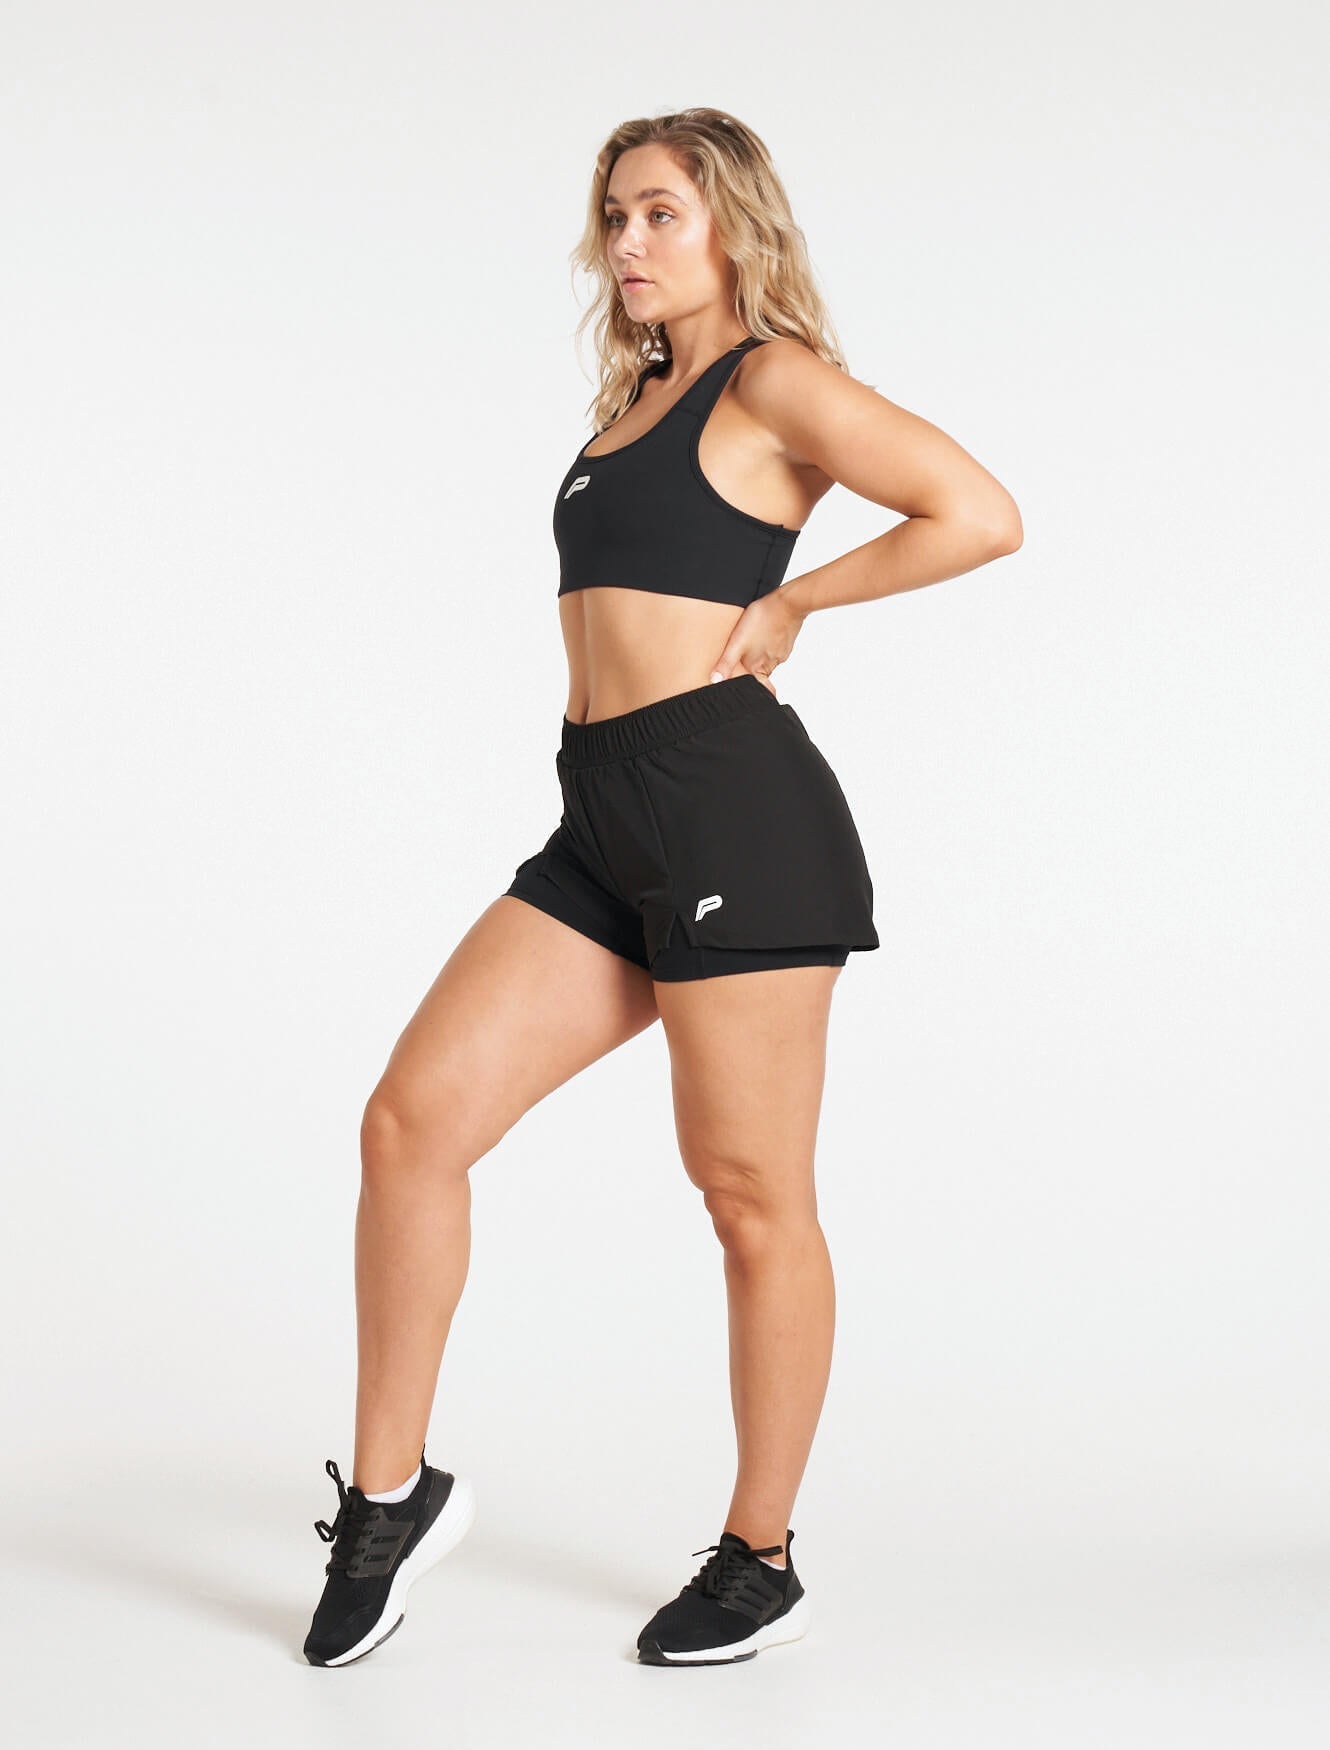 Pace Running Shorts / Blackout Pursue Fitness 8